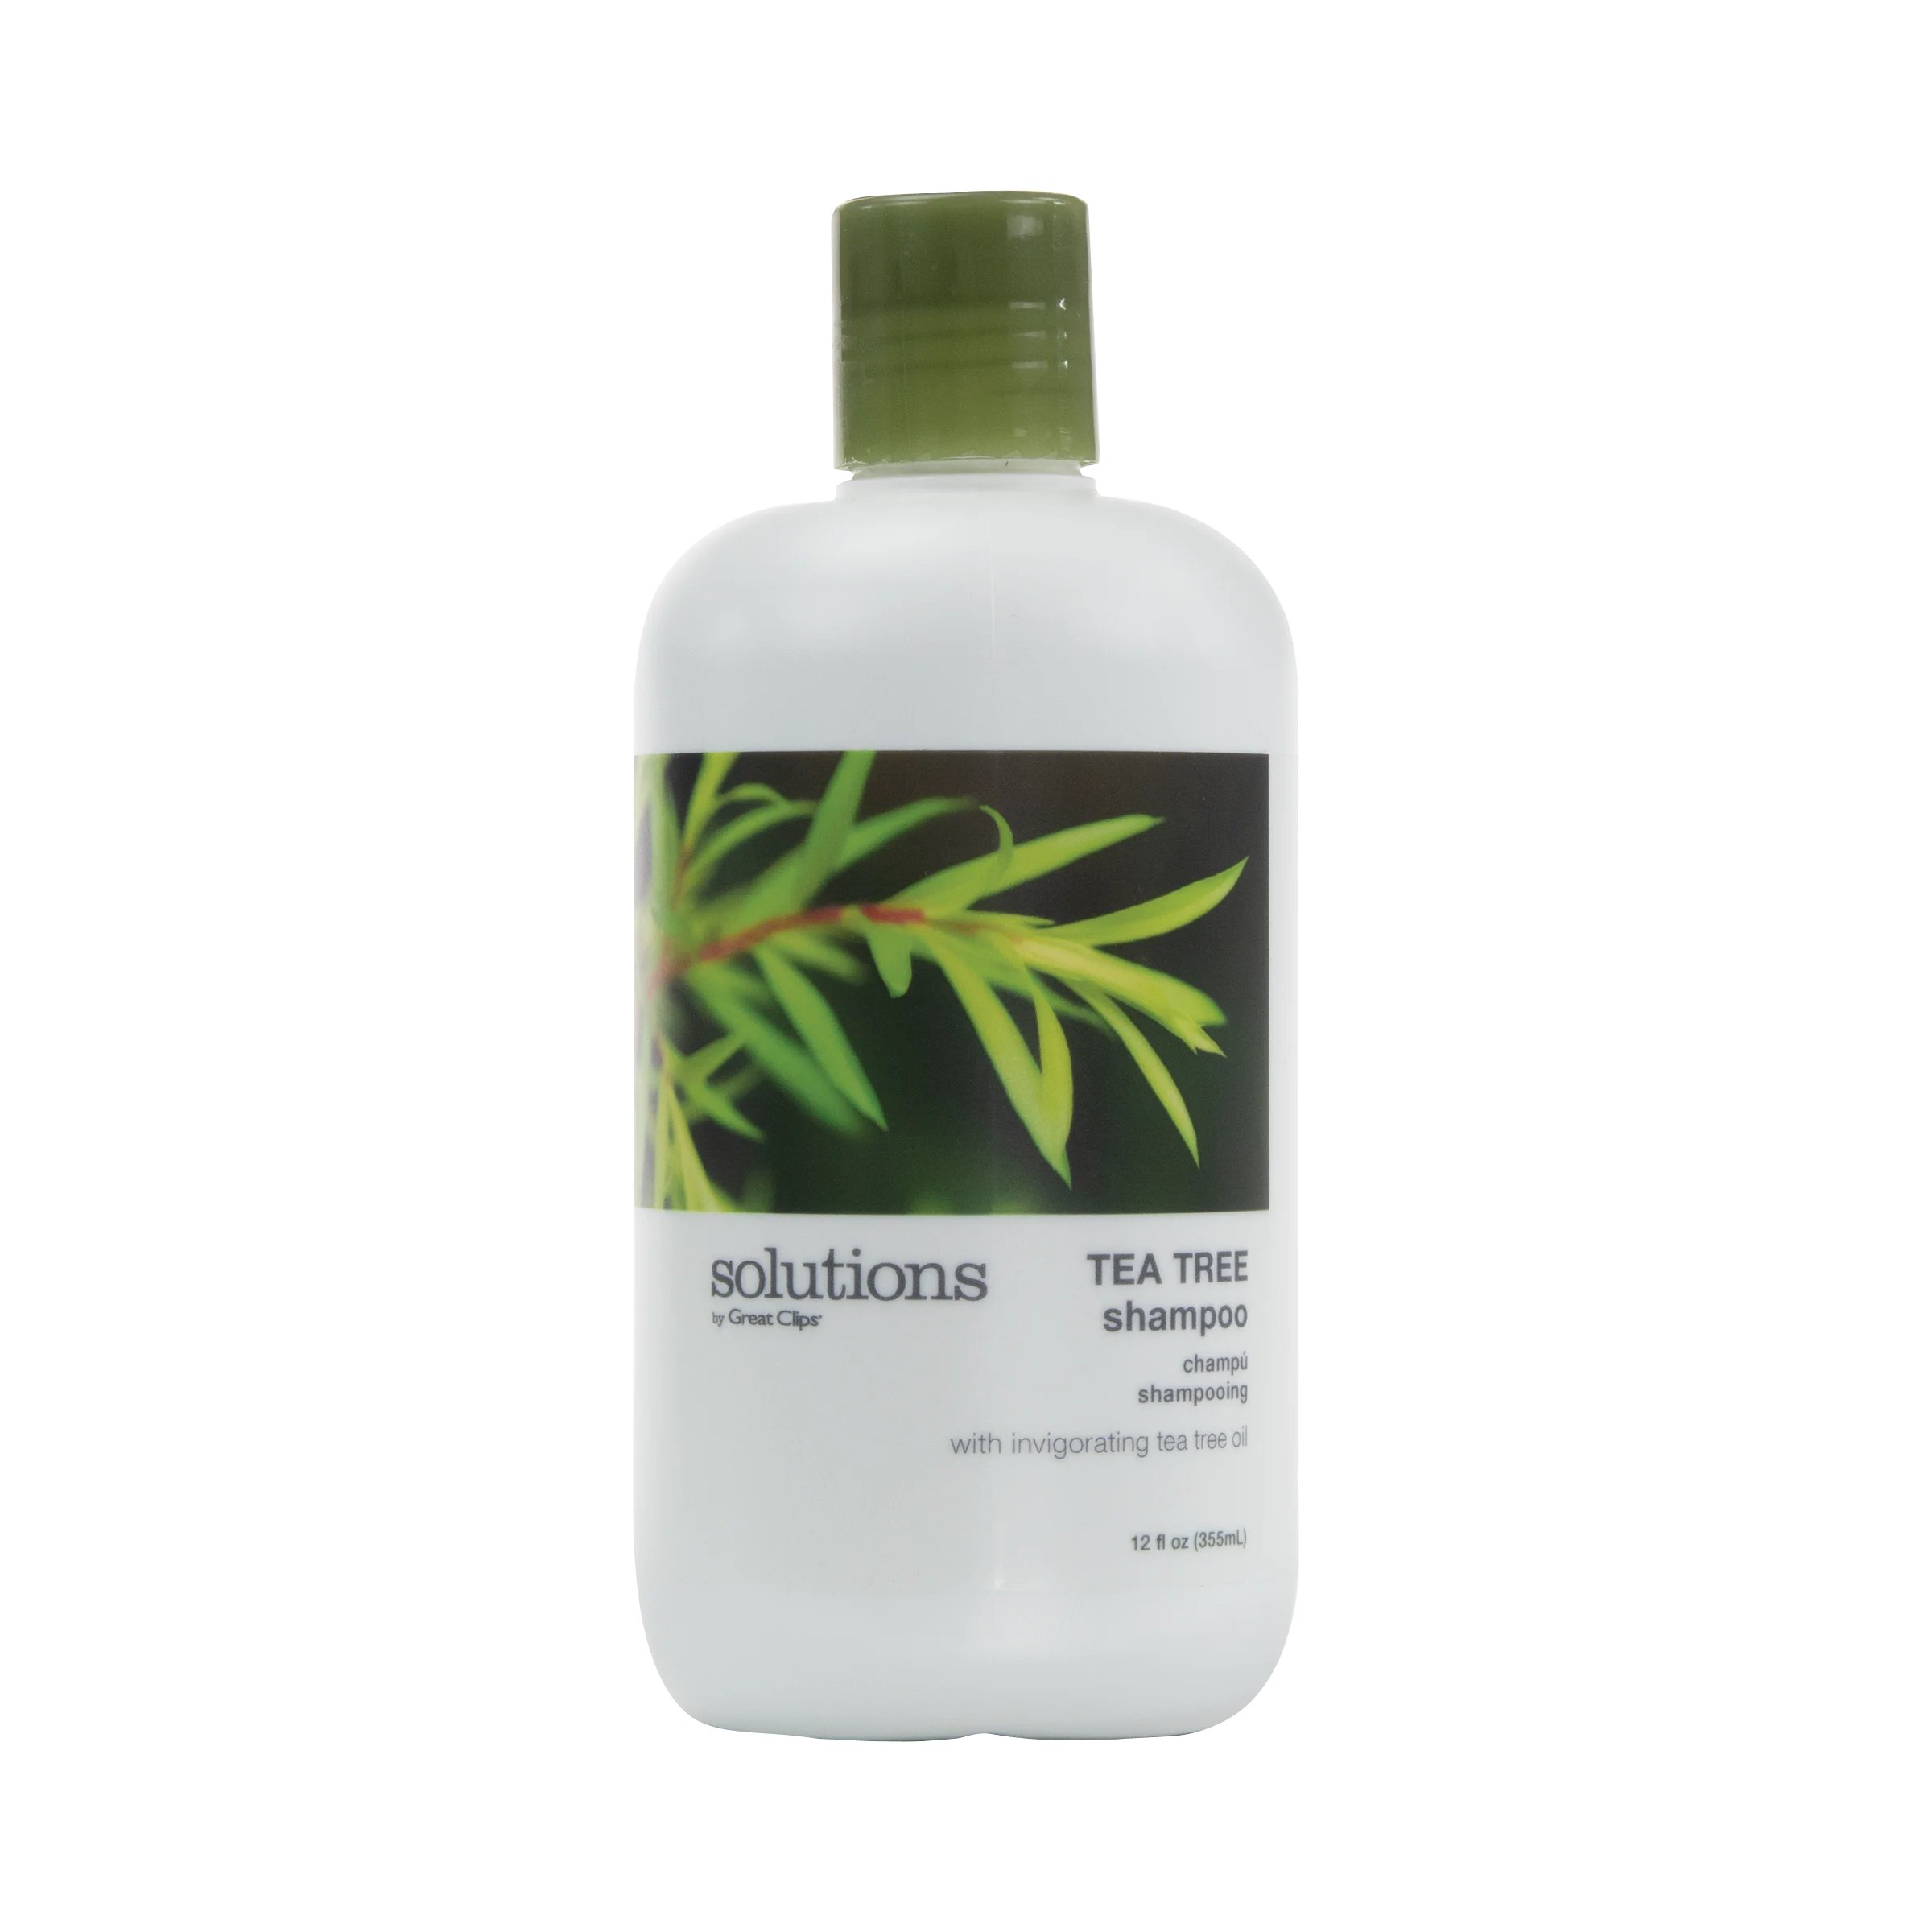 Solutions by Great Clips Tea Tree Shampoo